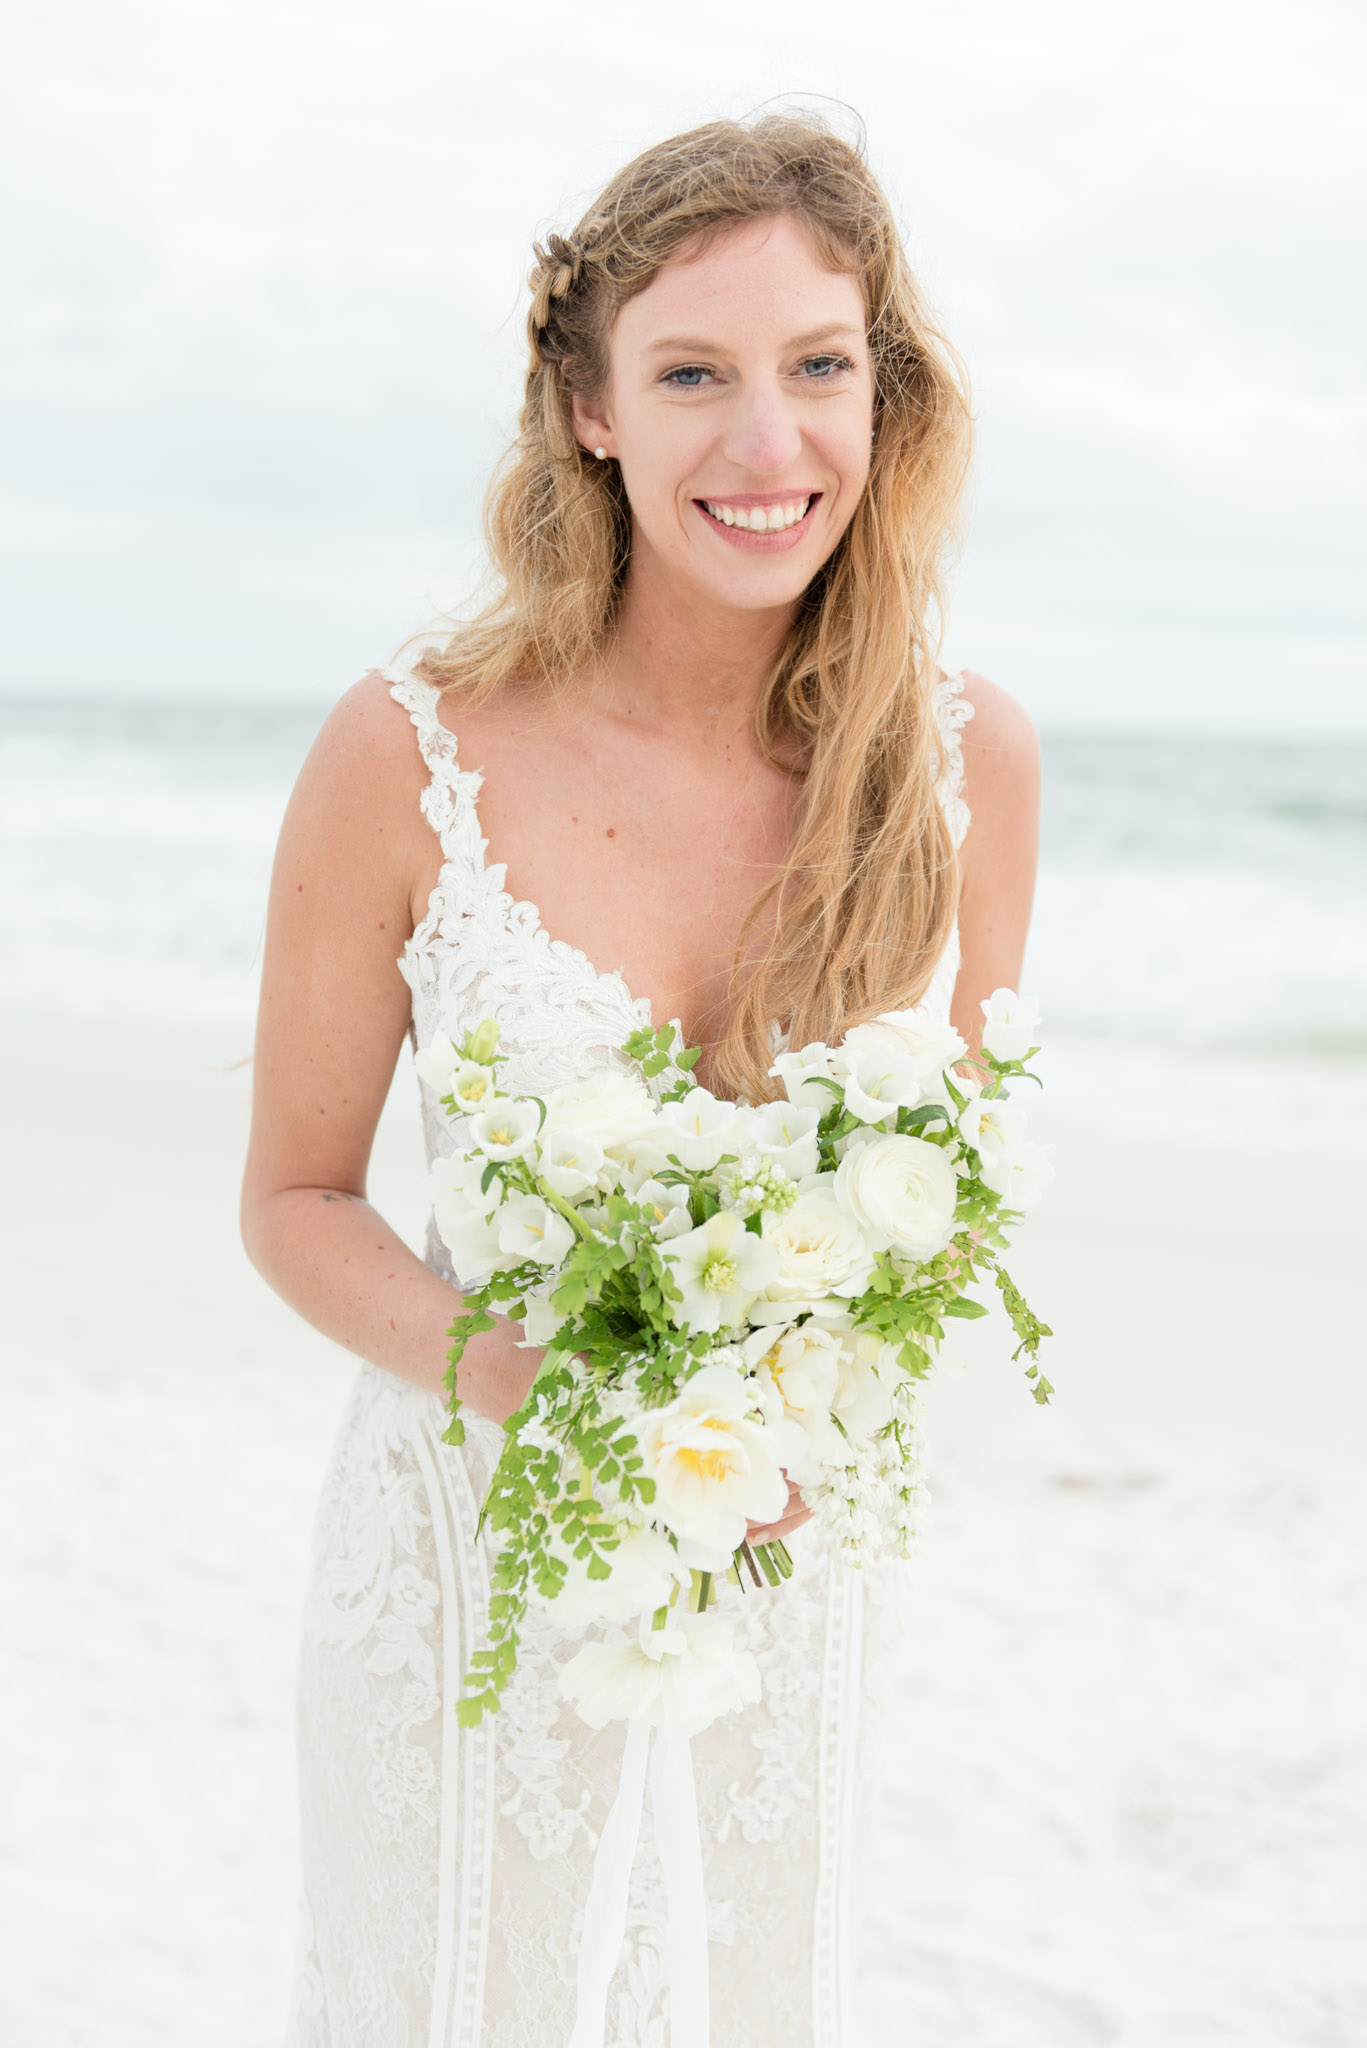 Bride smiles and laughs on beach.